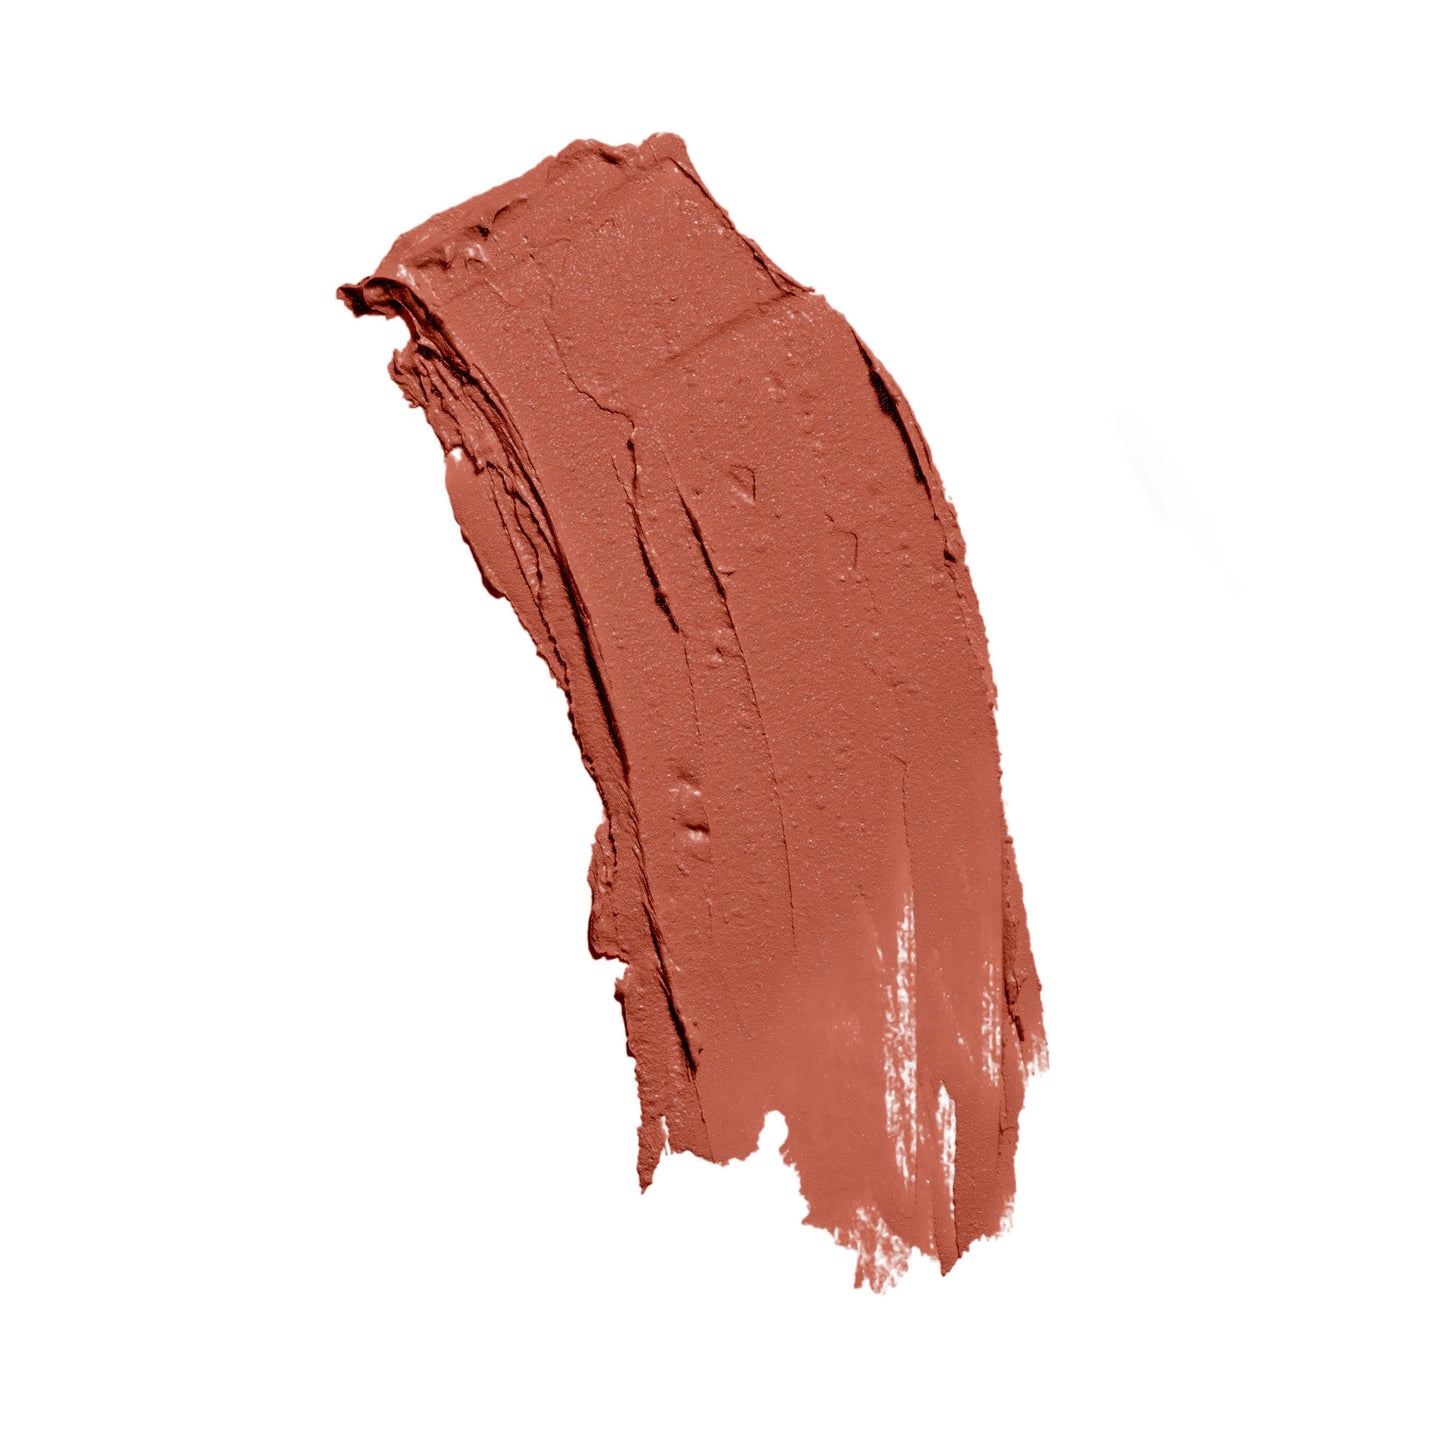 natural brown hue satin lipstick close-up on a white background